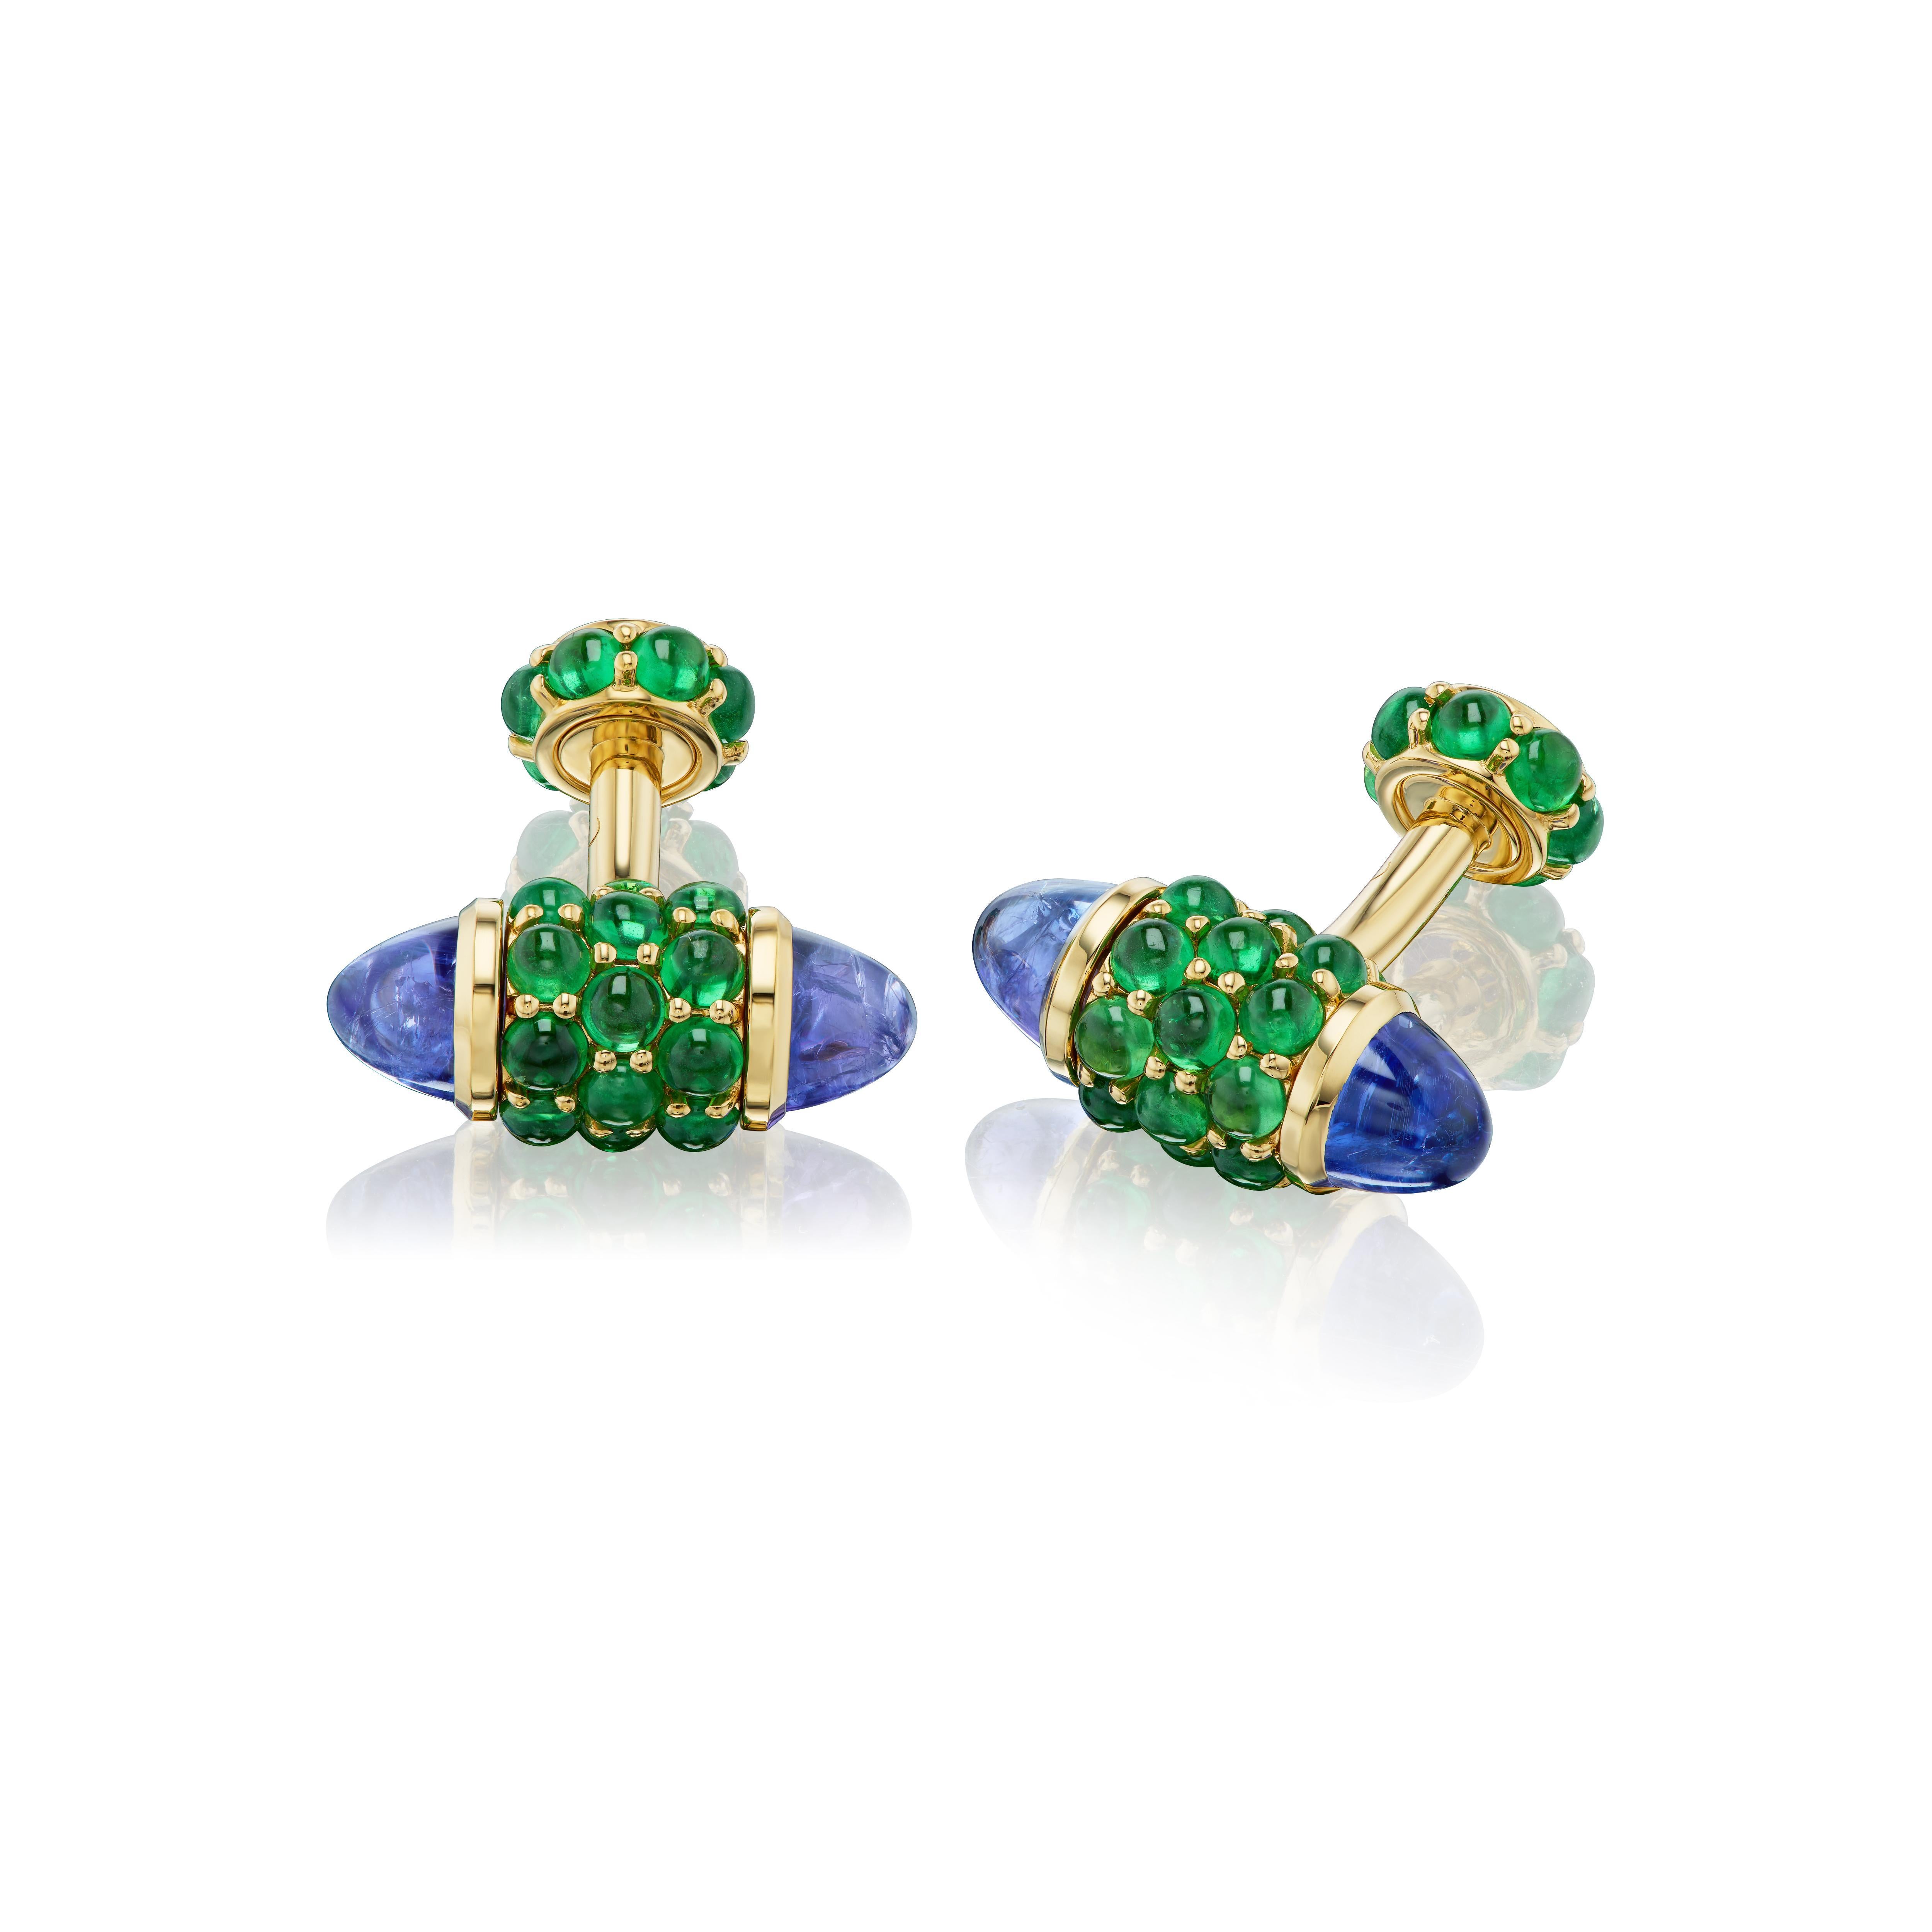 For the connoisseur who appreciates only the finest, and most unique, cufflinks.  Vivid green tsavorite garnets are paired with custom cut bullet shaped tanzanites in a one of a kind yellow gold mounting.   You will never see another pair like this